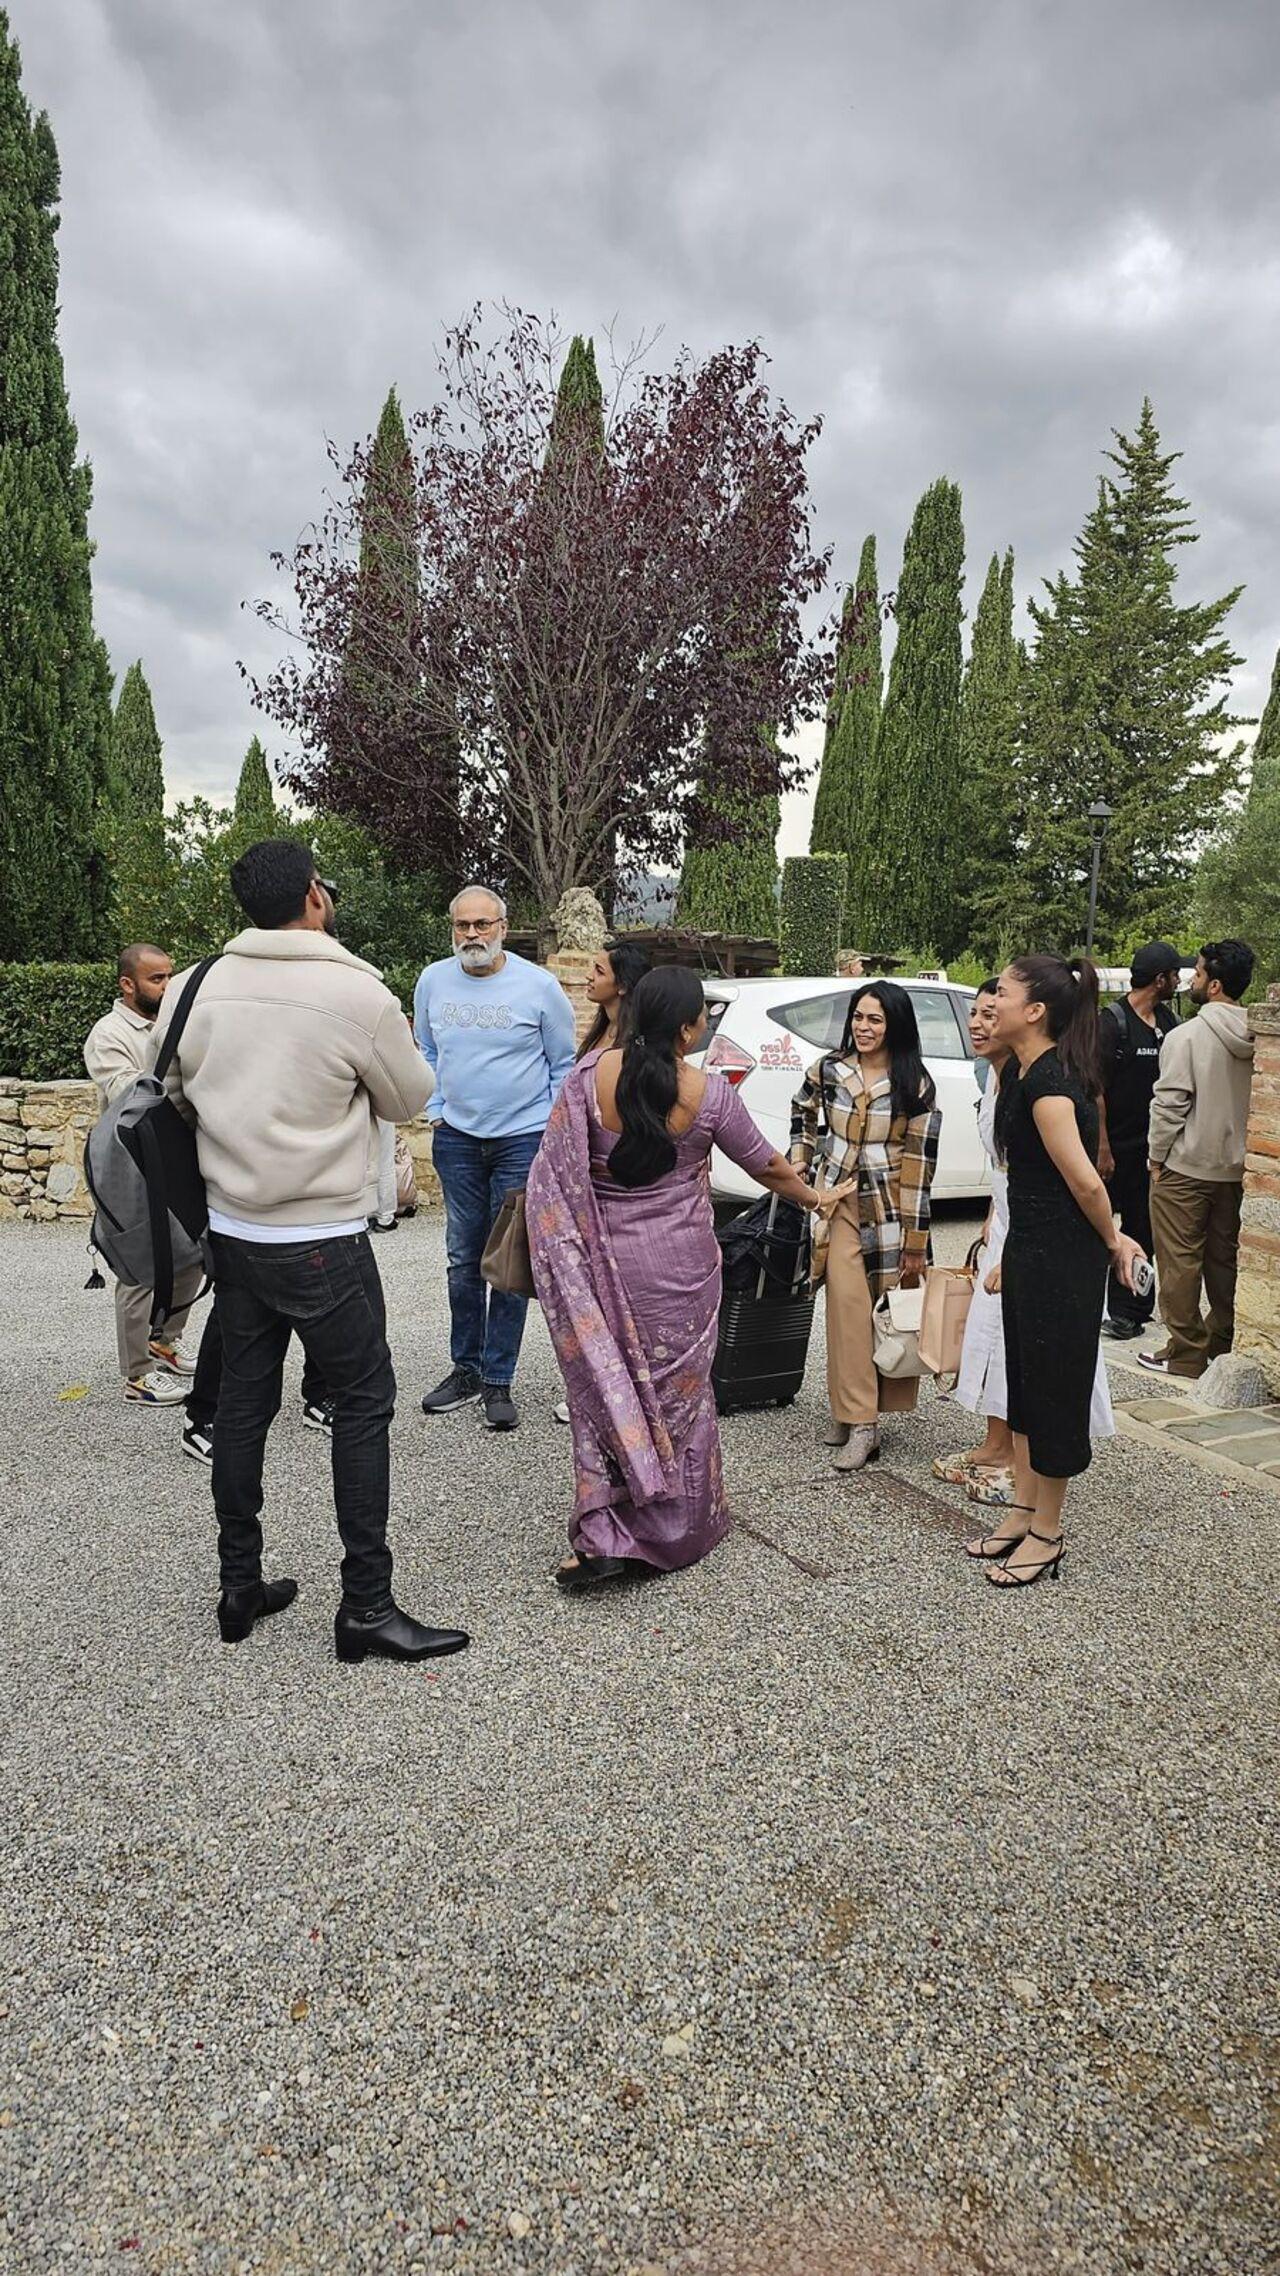 Varun and Lavanya along with their family arrive at the wedding venue in Tuscany